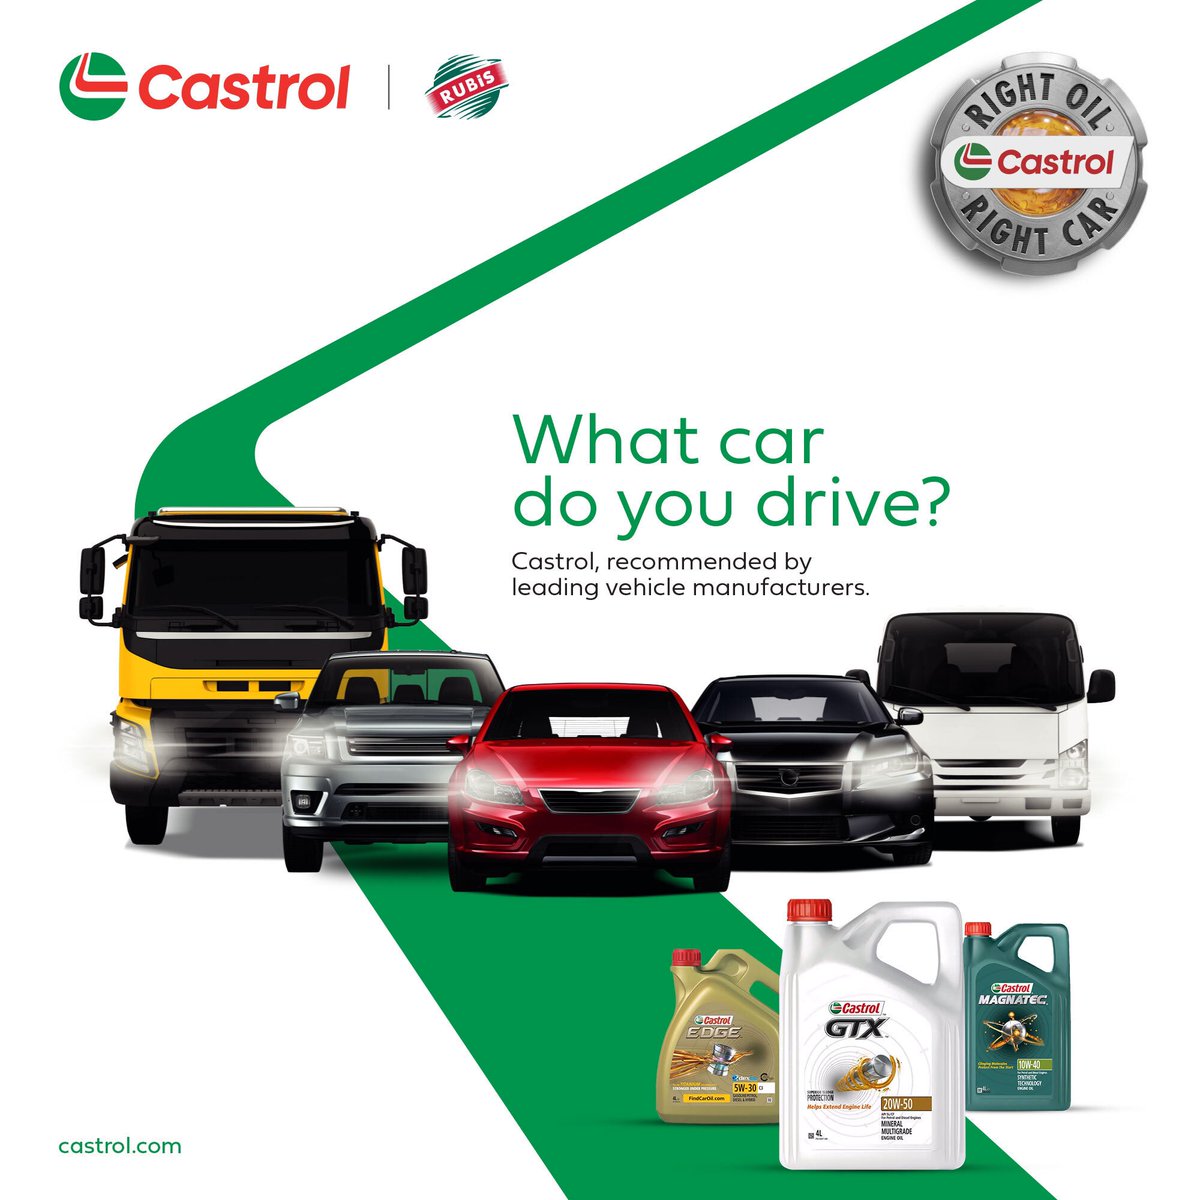 The leading car manufacturers in the world have spoken. If you use the right oil, you have the right car. Ask for #CastrolOil at your nearest Rubis station. #RightOilRightCar